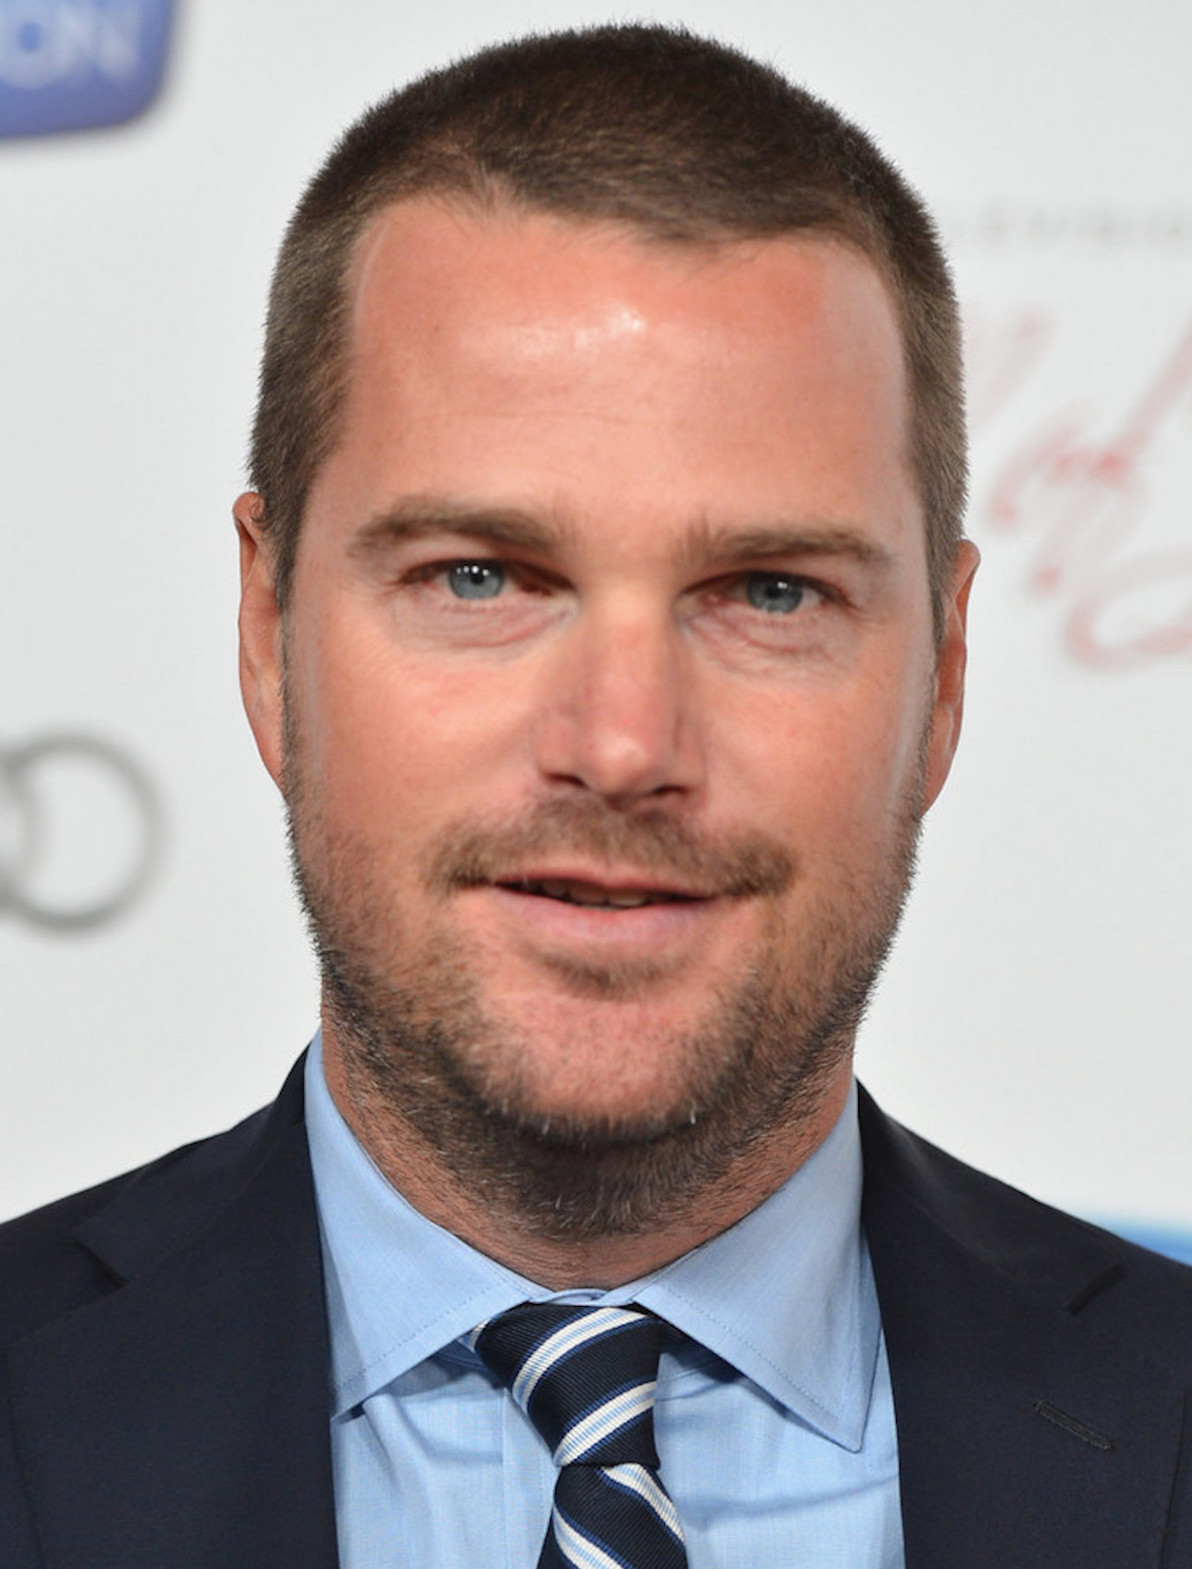 Chris o’donnell